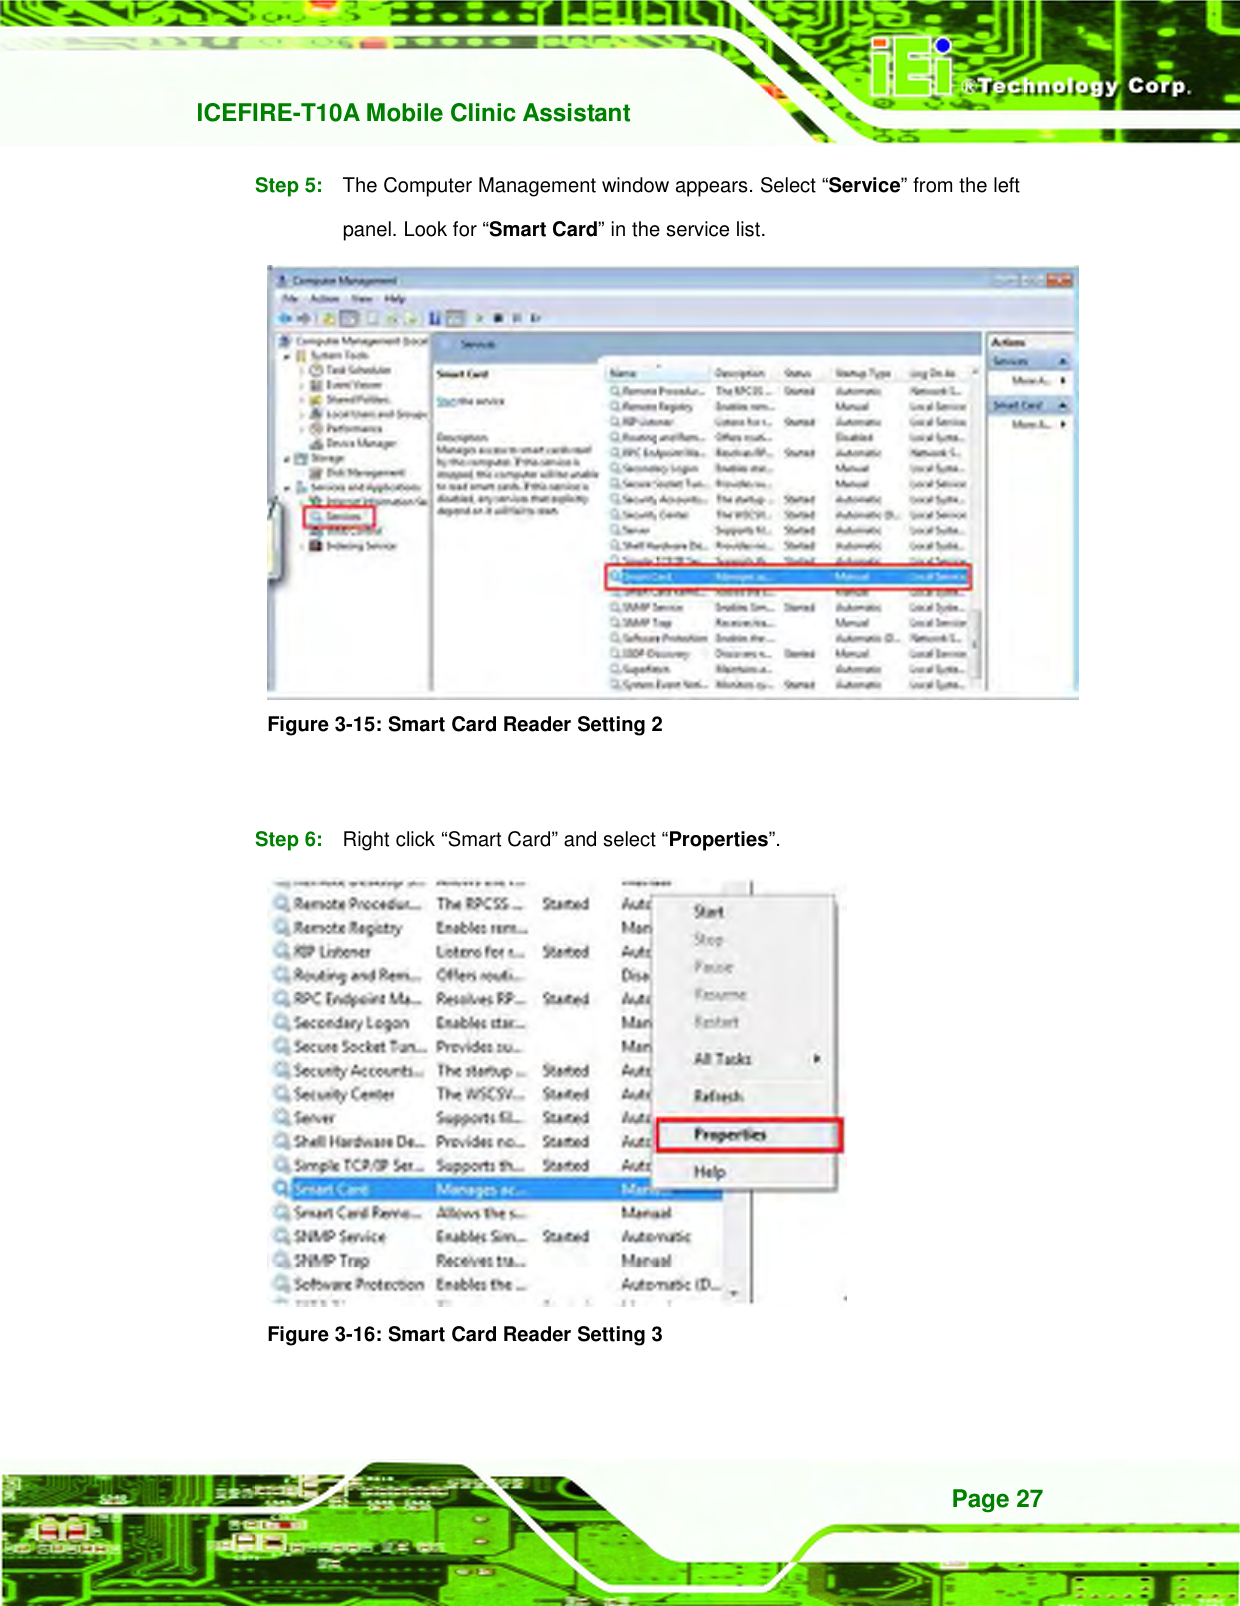   ICEFIRE-T10A Mobile Clinic Assistant Page 27 Step 5:  The Computer Management window appears. Select “Service” from the left panel. Look for “Smart Card” in the service list.    Figure 3-15: Smart Card Reader Setting 2    Step 6:  Right click “Smart Card” and select “Properties”.    Figure 3-16: Smart Card Reader Setting 3    